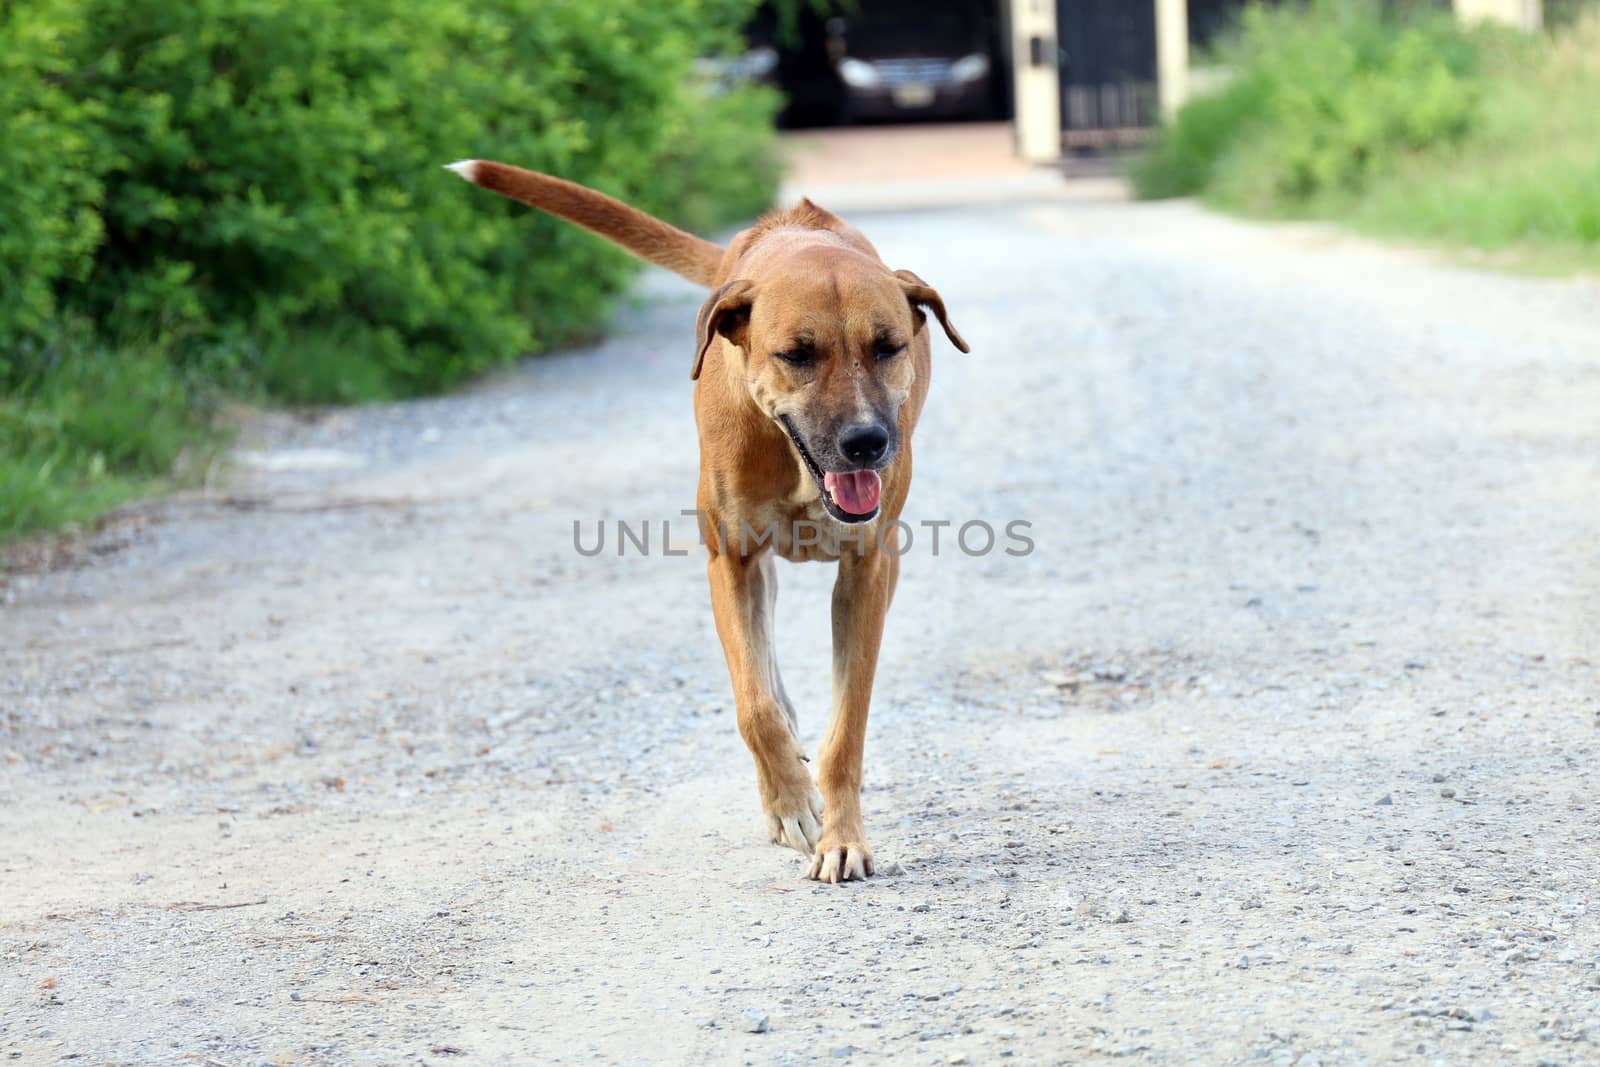 Dog, Brown dog good mood Walking in front and smiling dog by cgdeaw